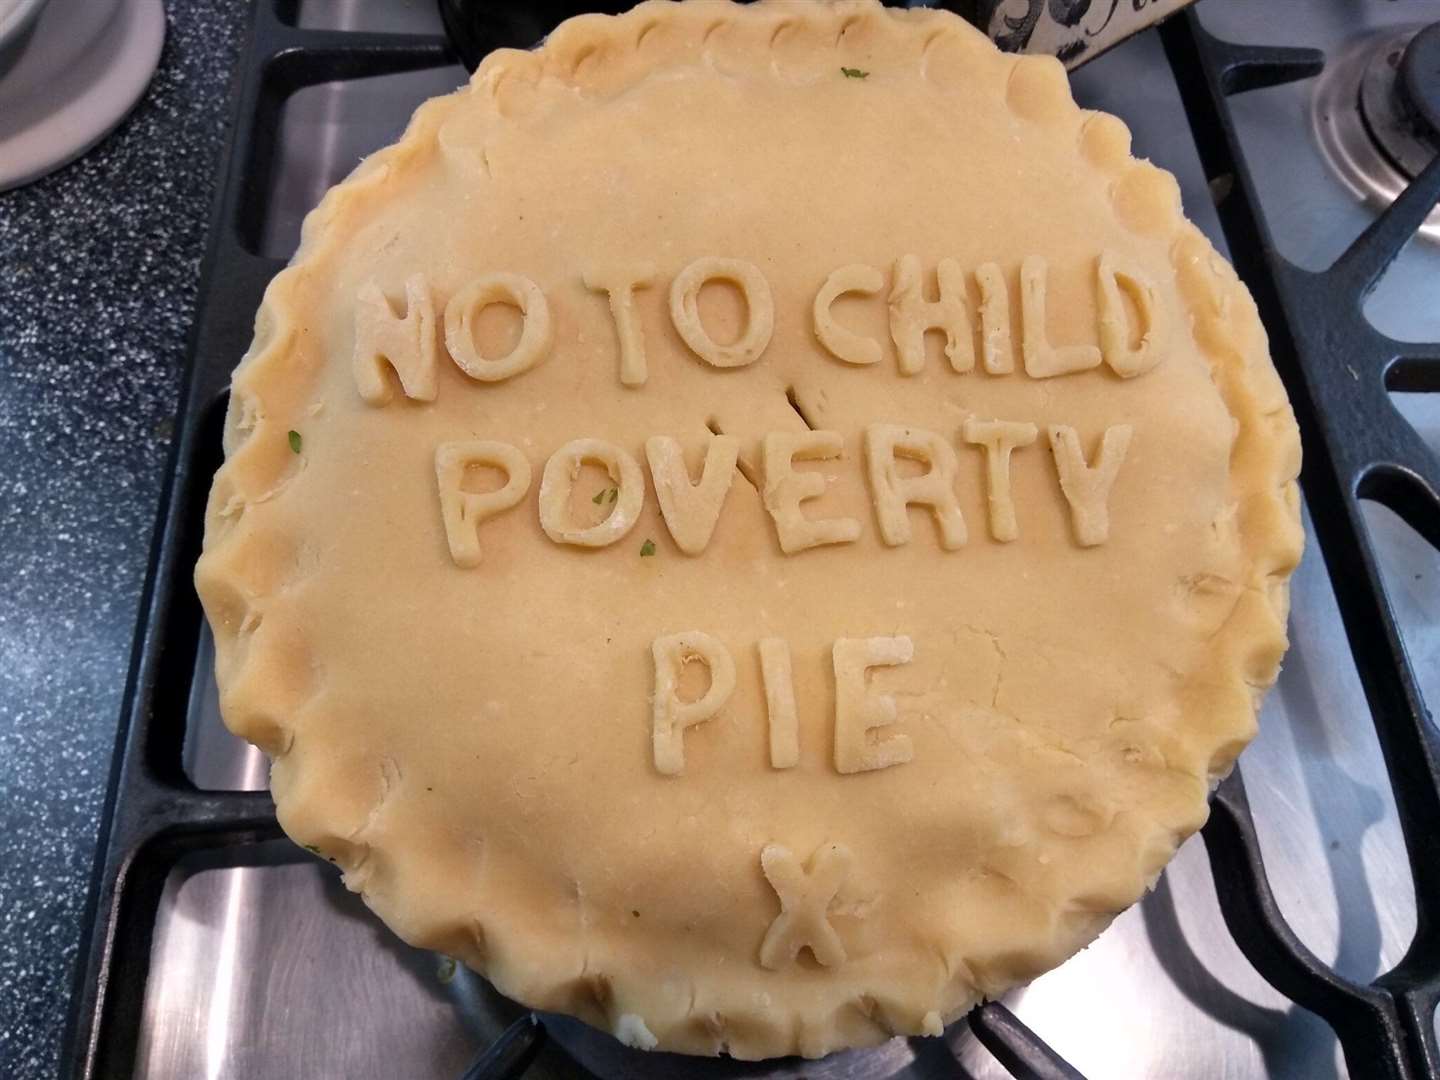 Jill Martin says she used to cook 'poverty pie' for her own children when times were tough